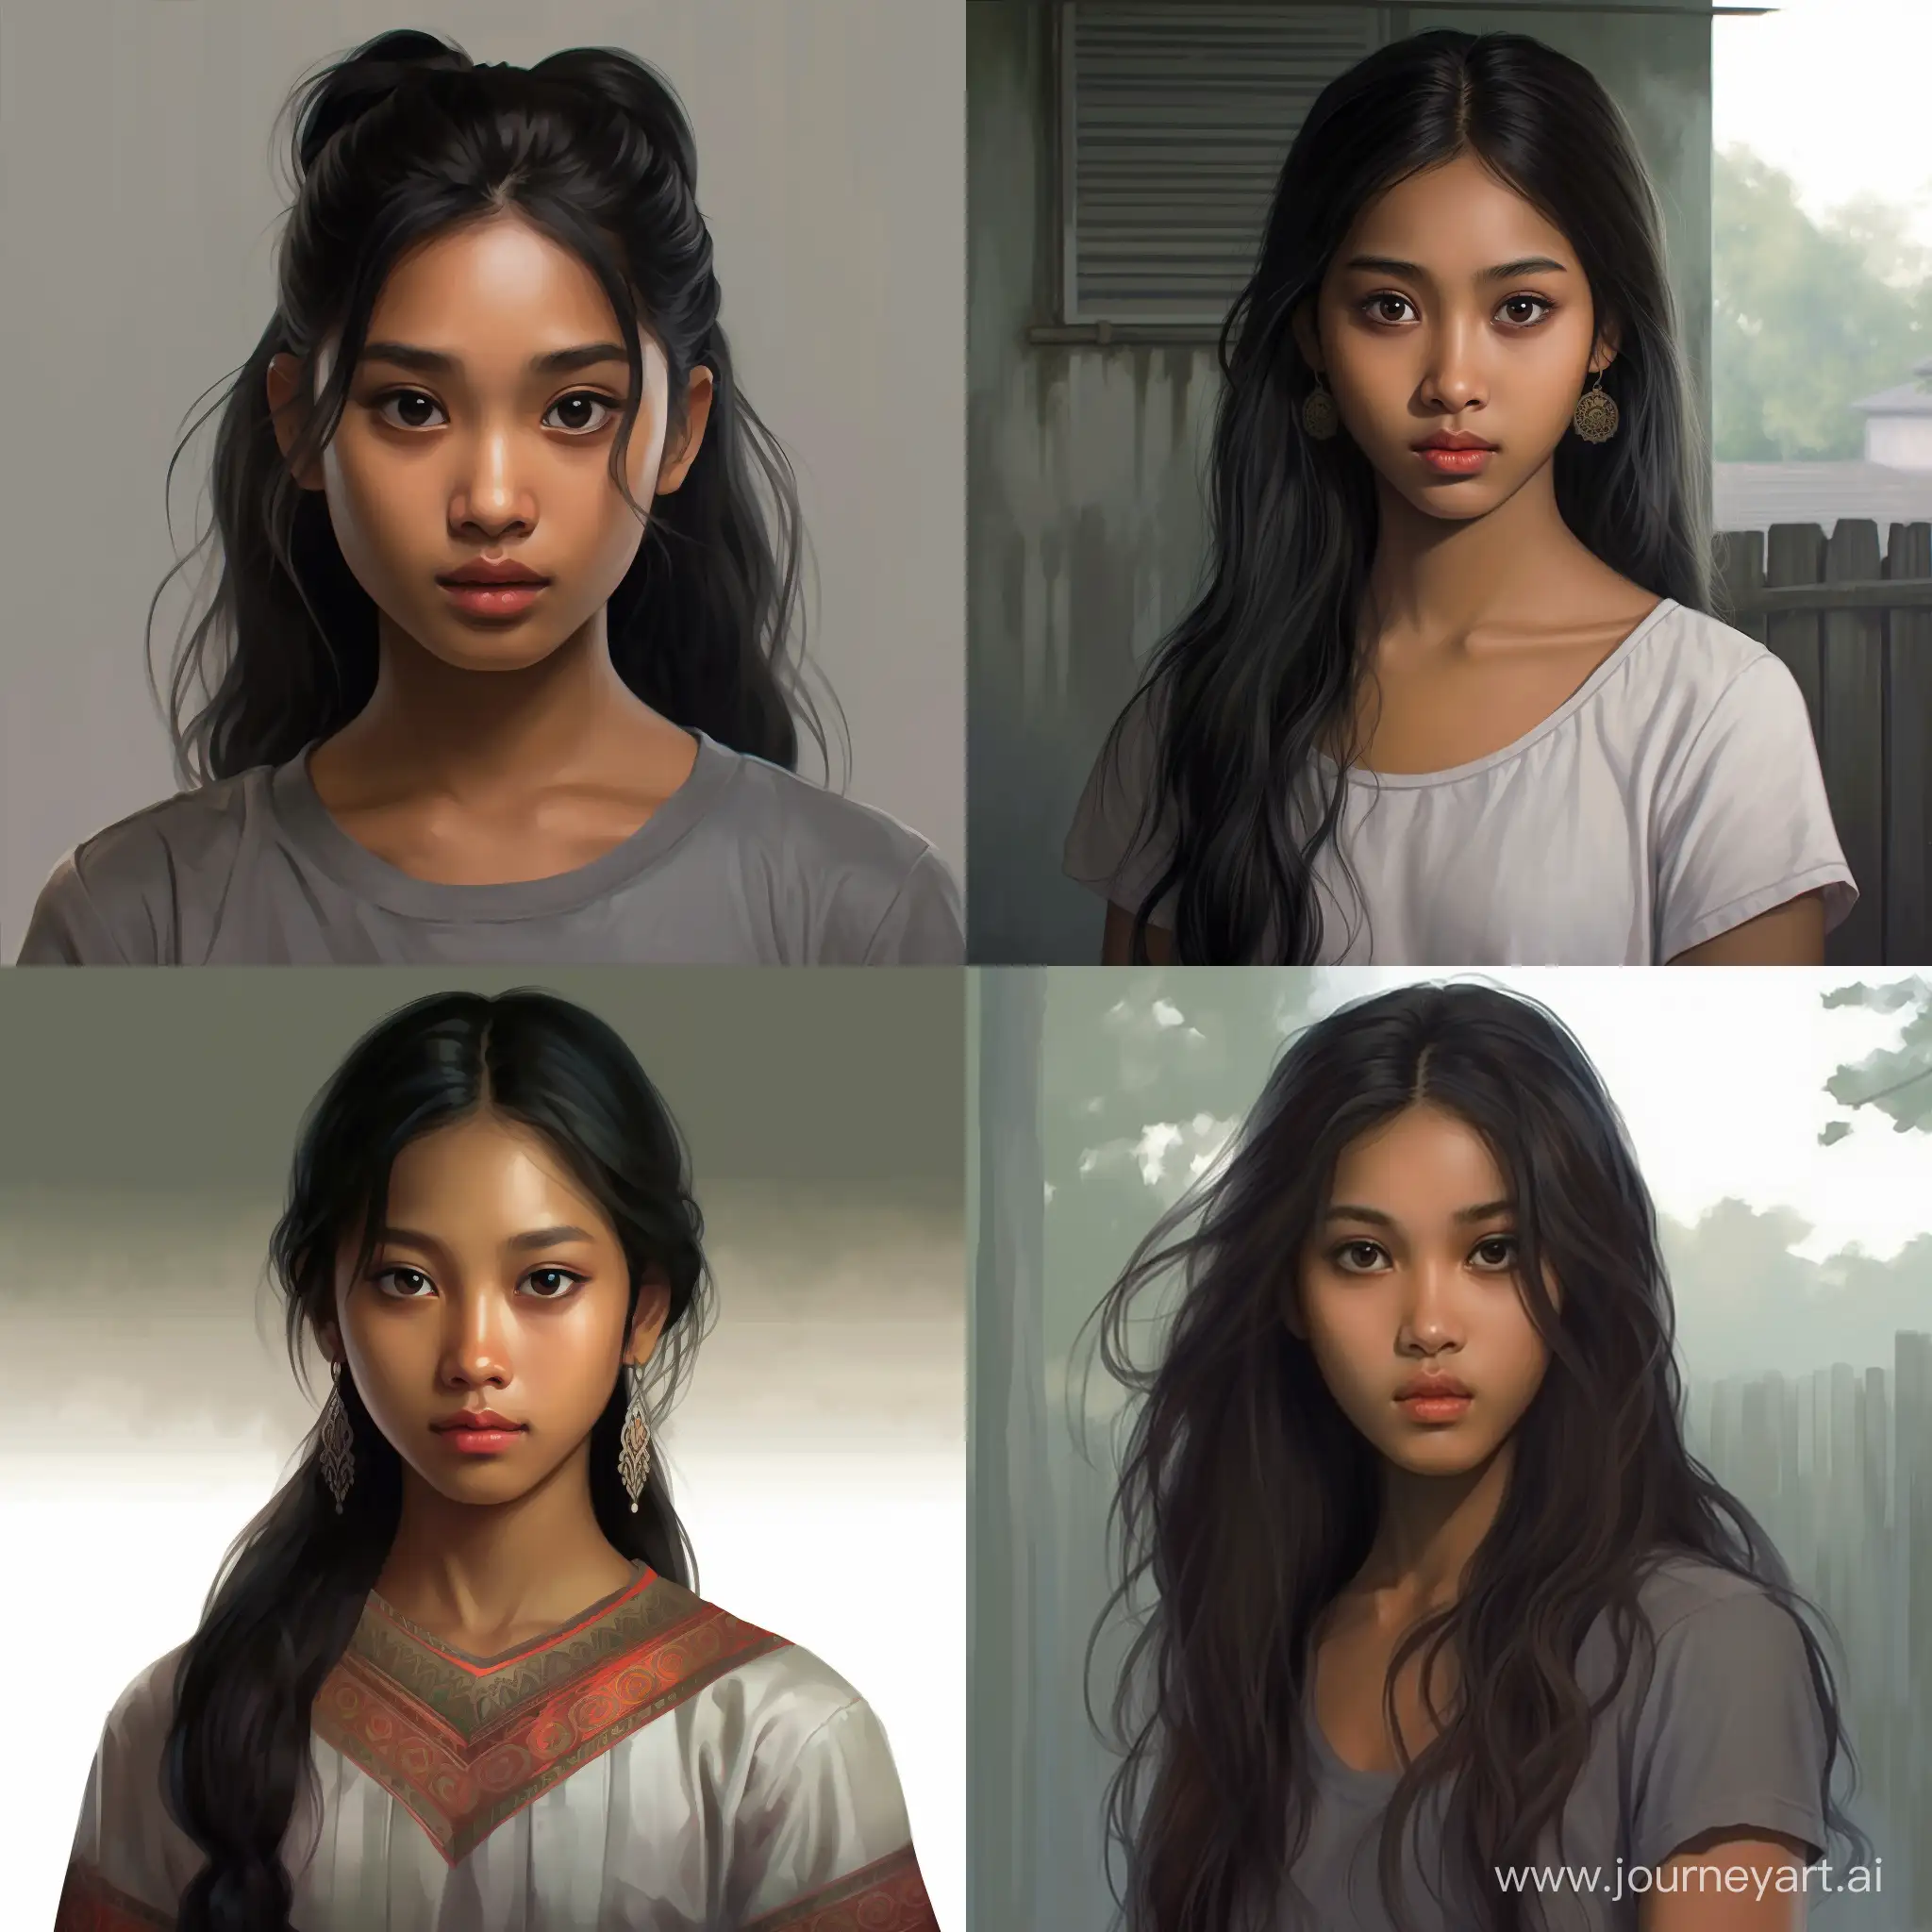 a realistic render of a seventeen-year-old Filipino girl